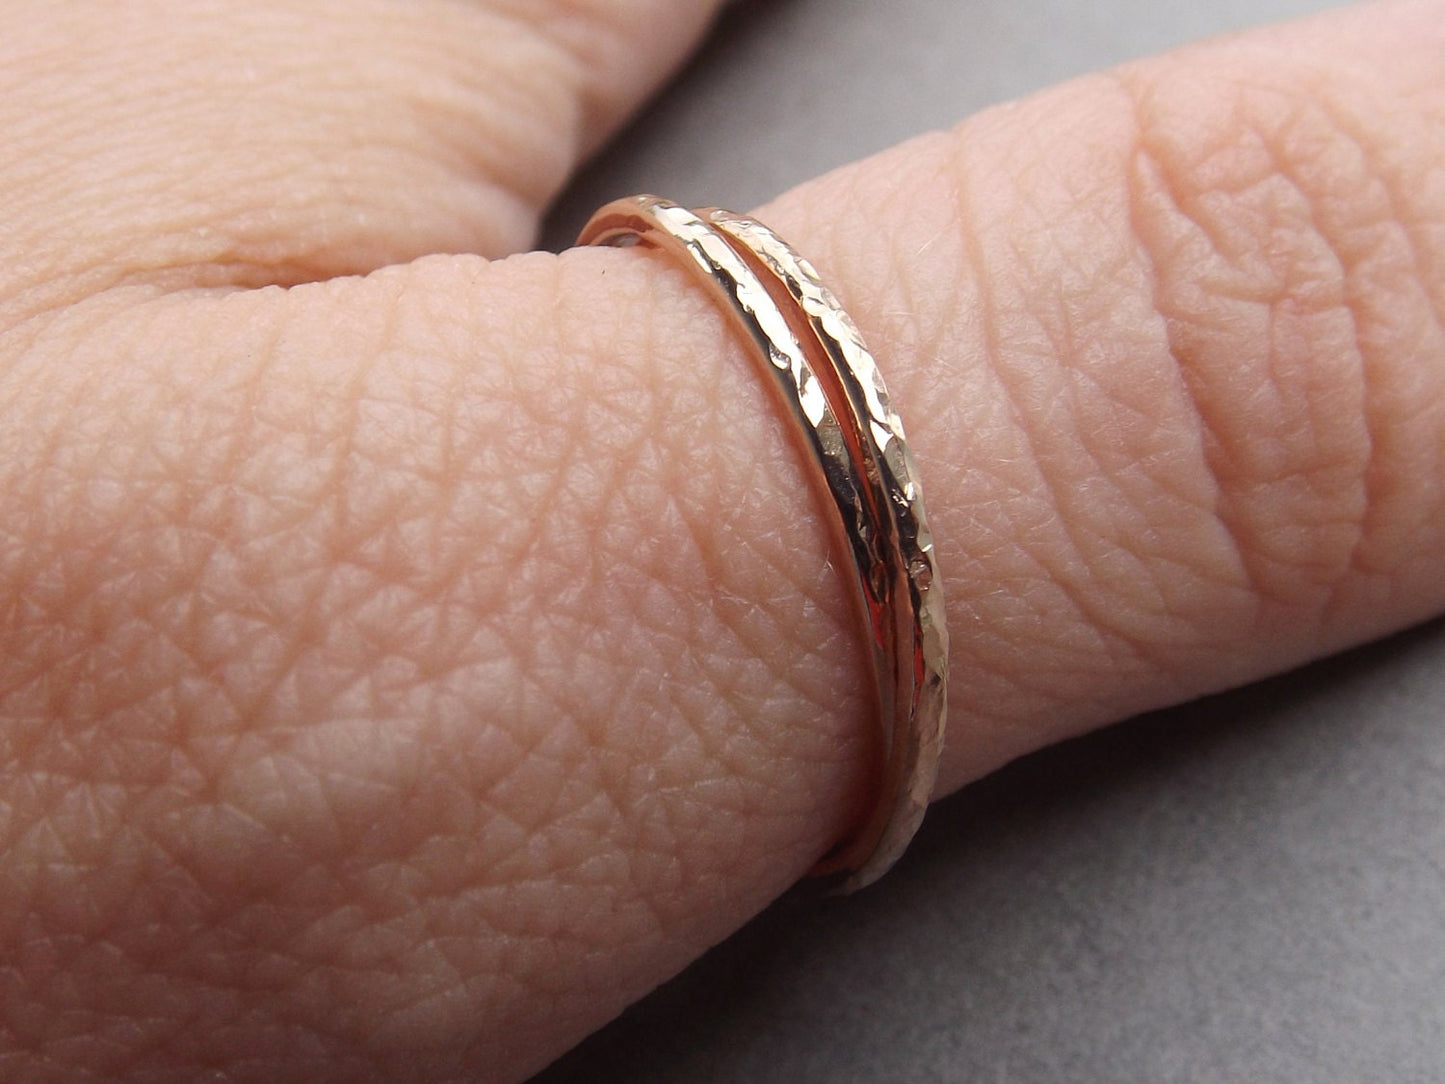 Gold Interlocking Thumb Rings,Thumb Rings,Gold Thumb Ring,Textured Rings,Rolling Ring,Stacking Rings, Minimalist Rings,Unique Ring,Rose Gold